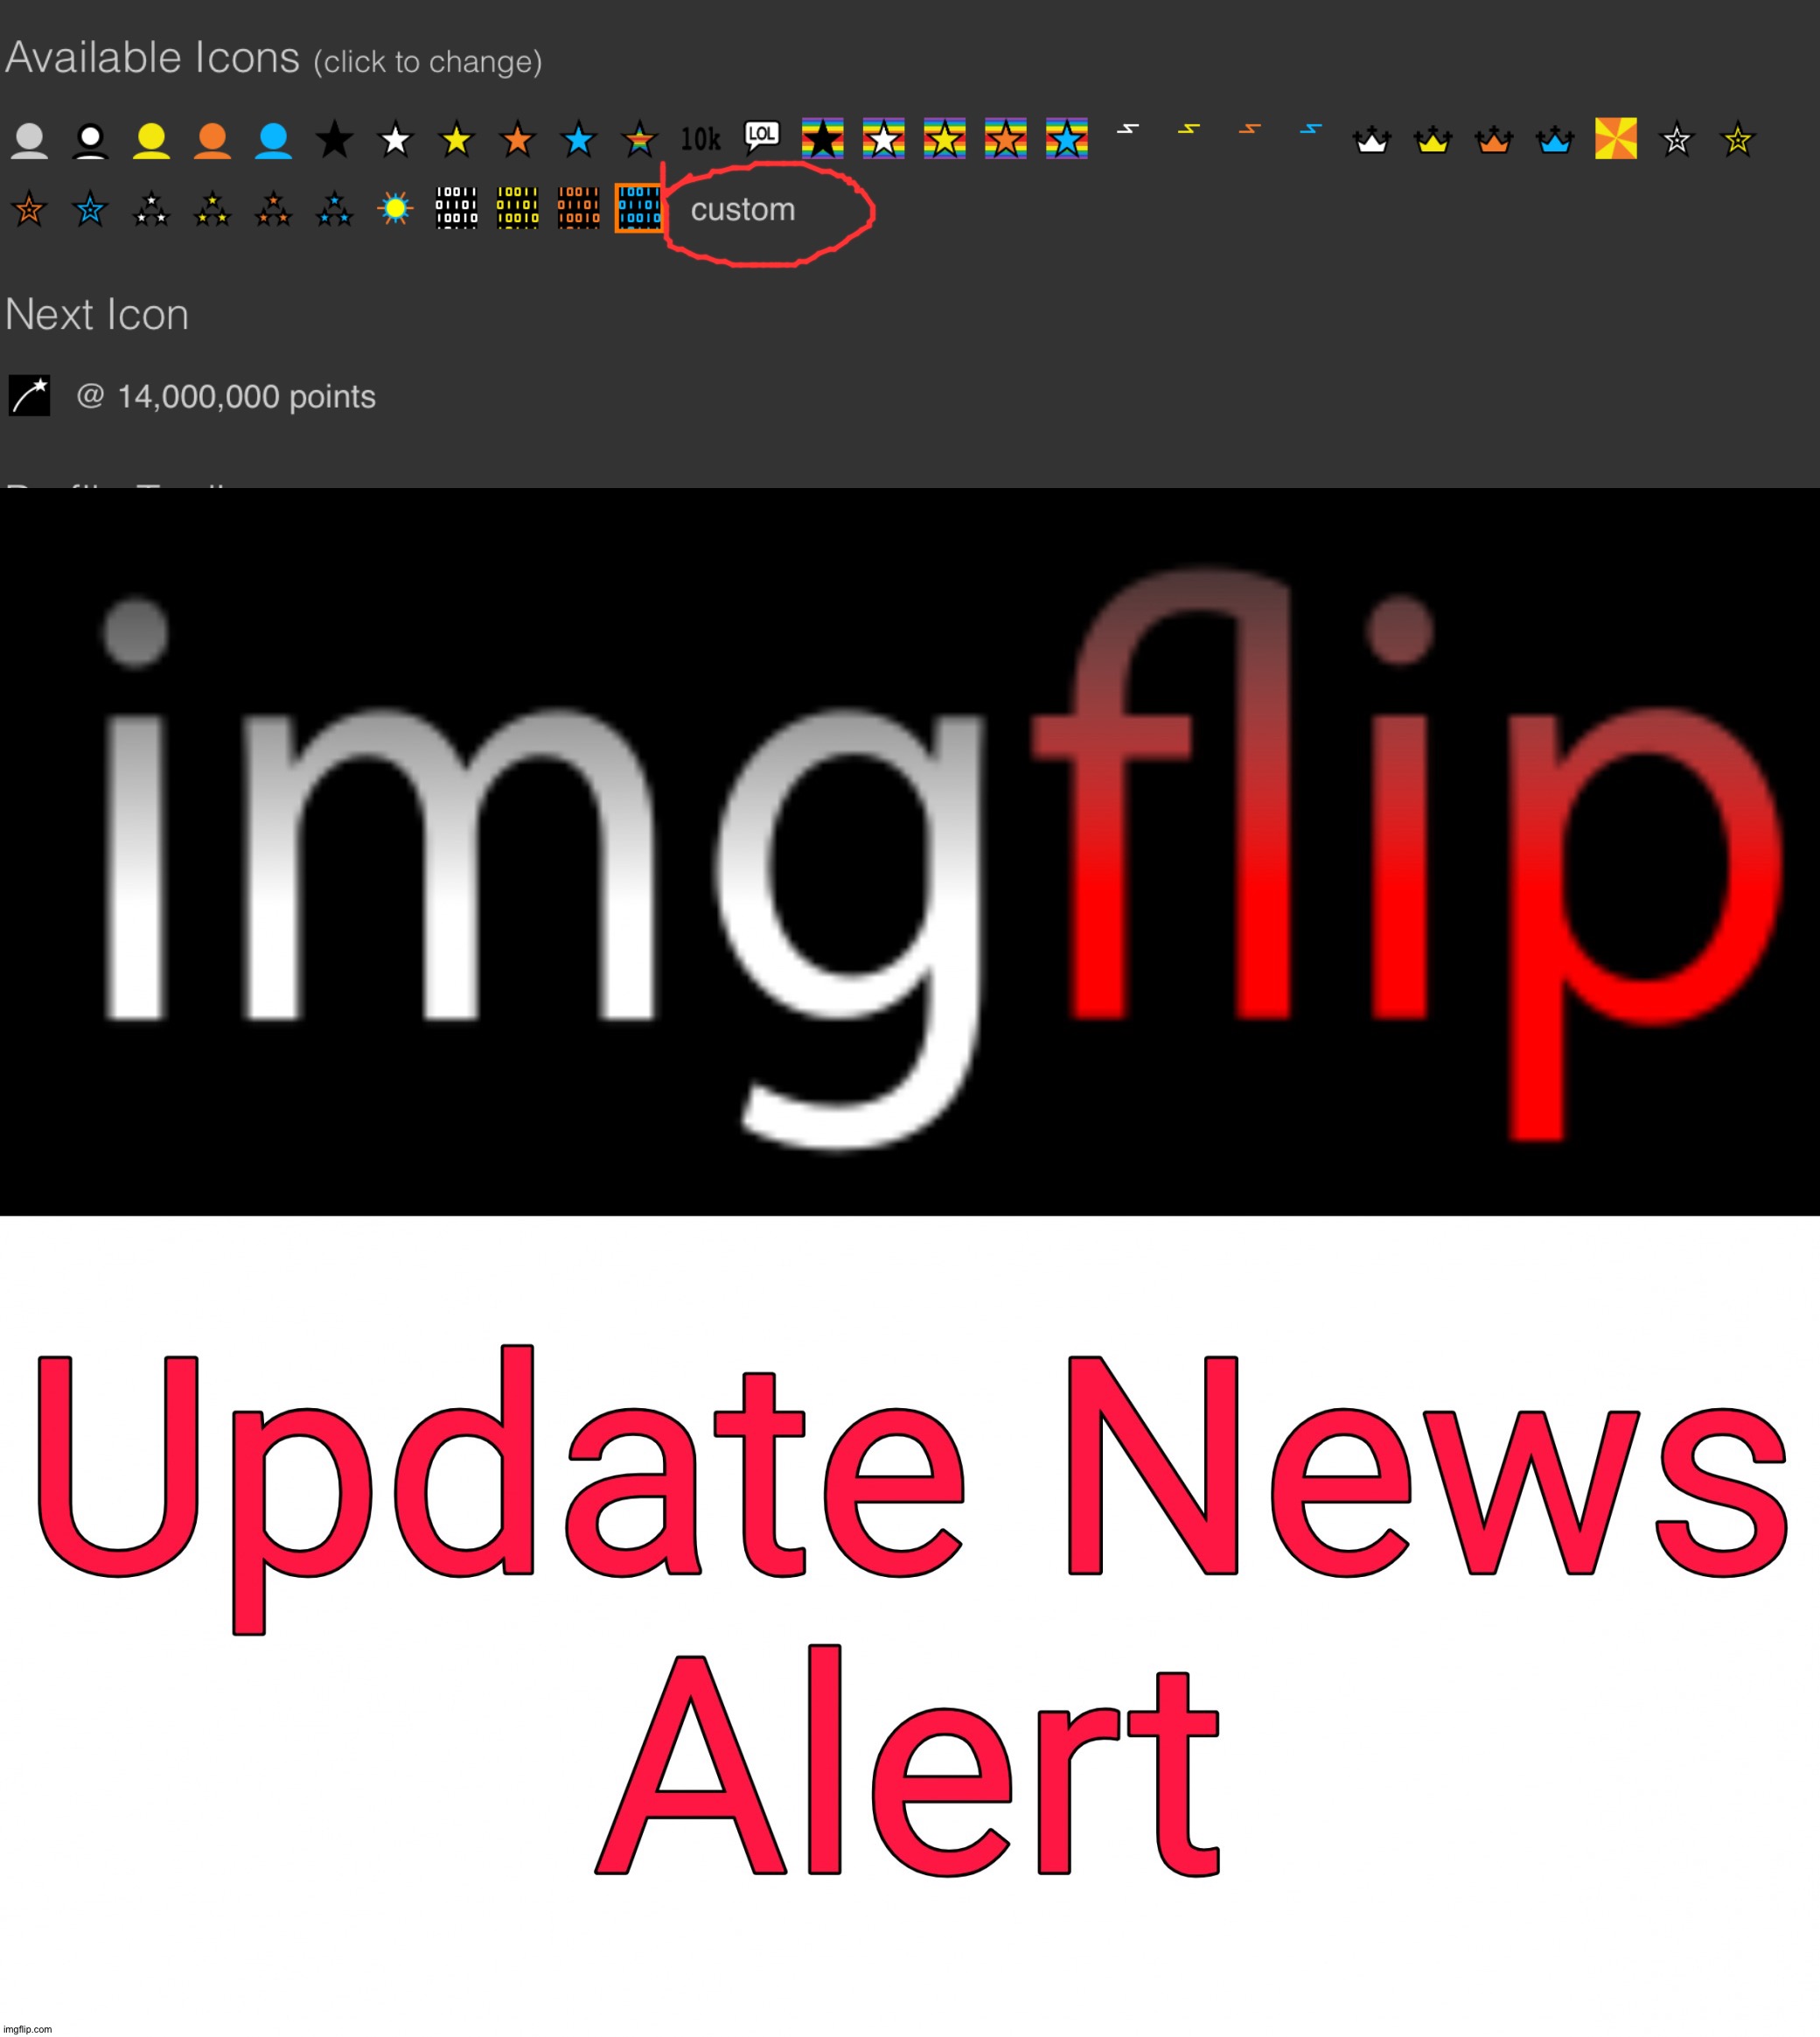 They've actually listened to us! But we only draw the icon. | image tagged in imgflip update news alert | made w/ Imgflip meme maker